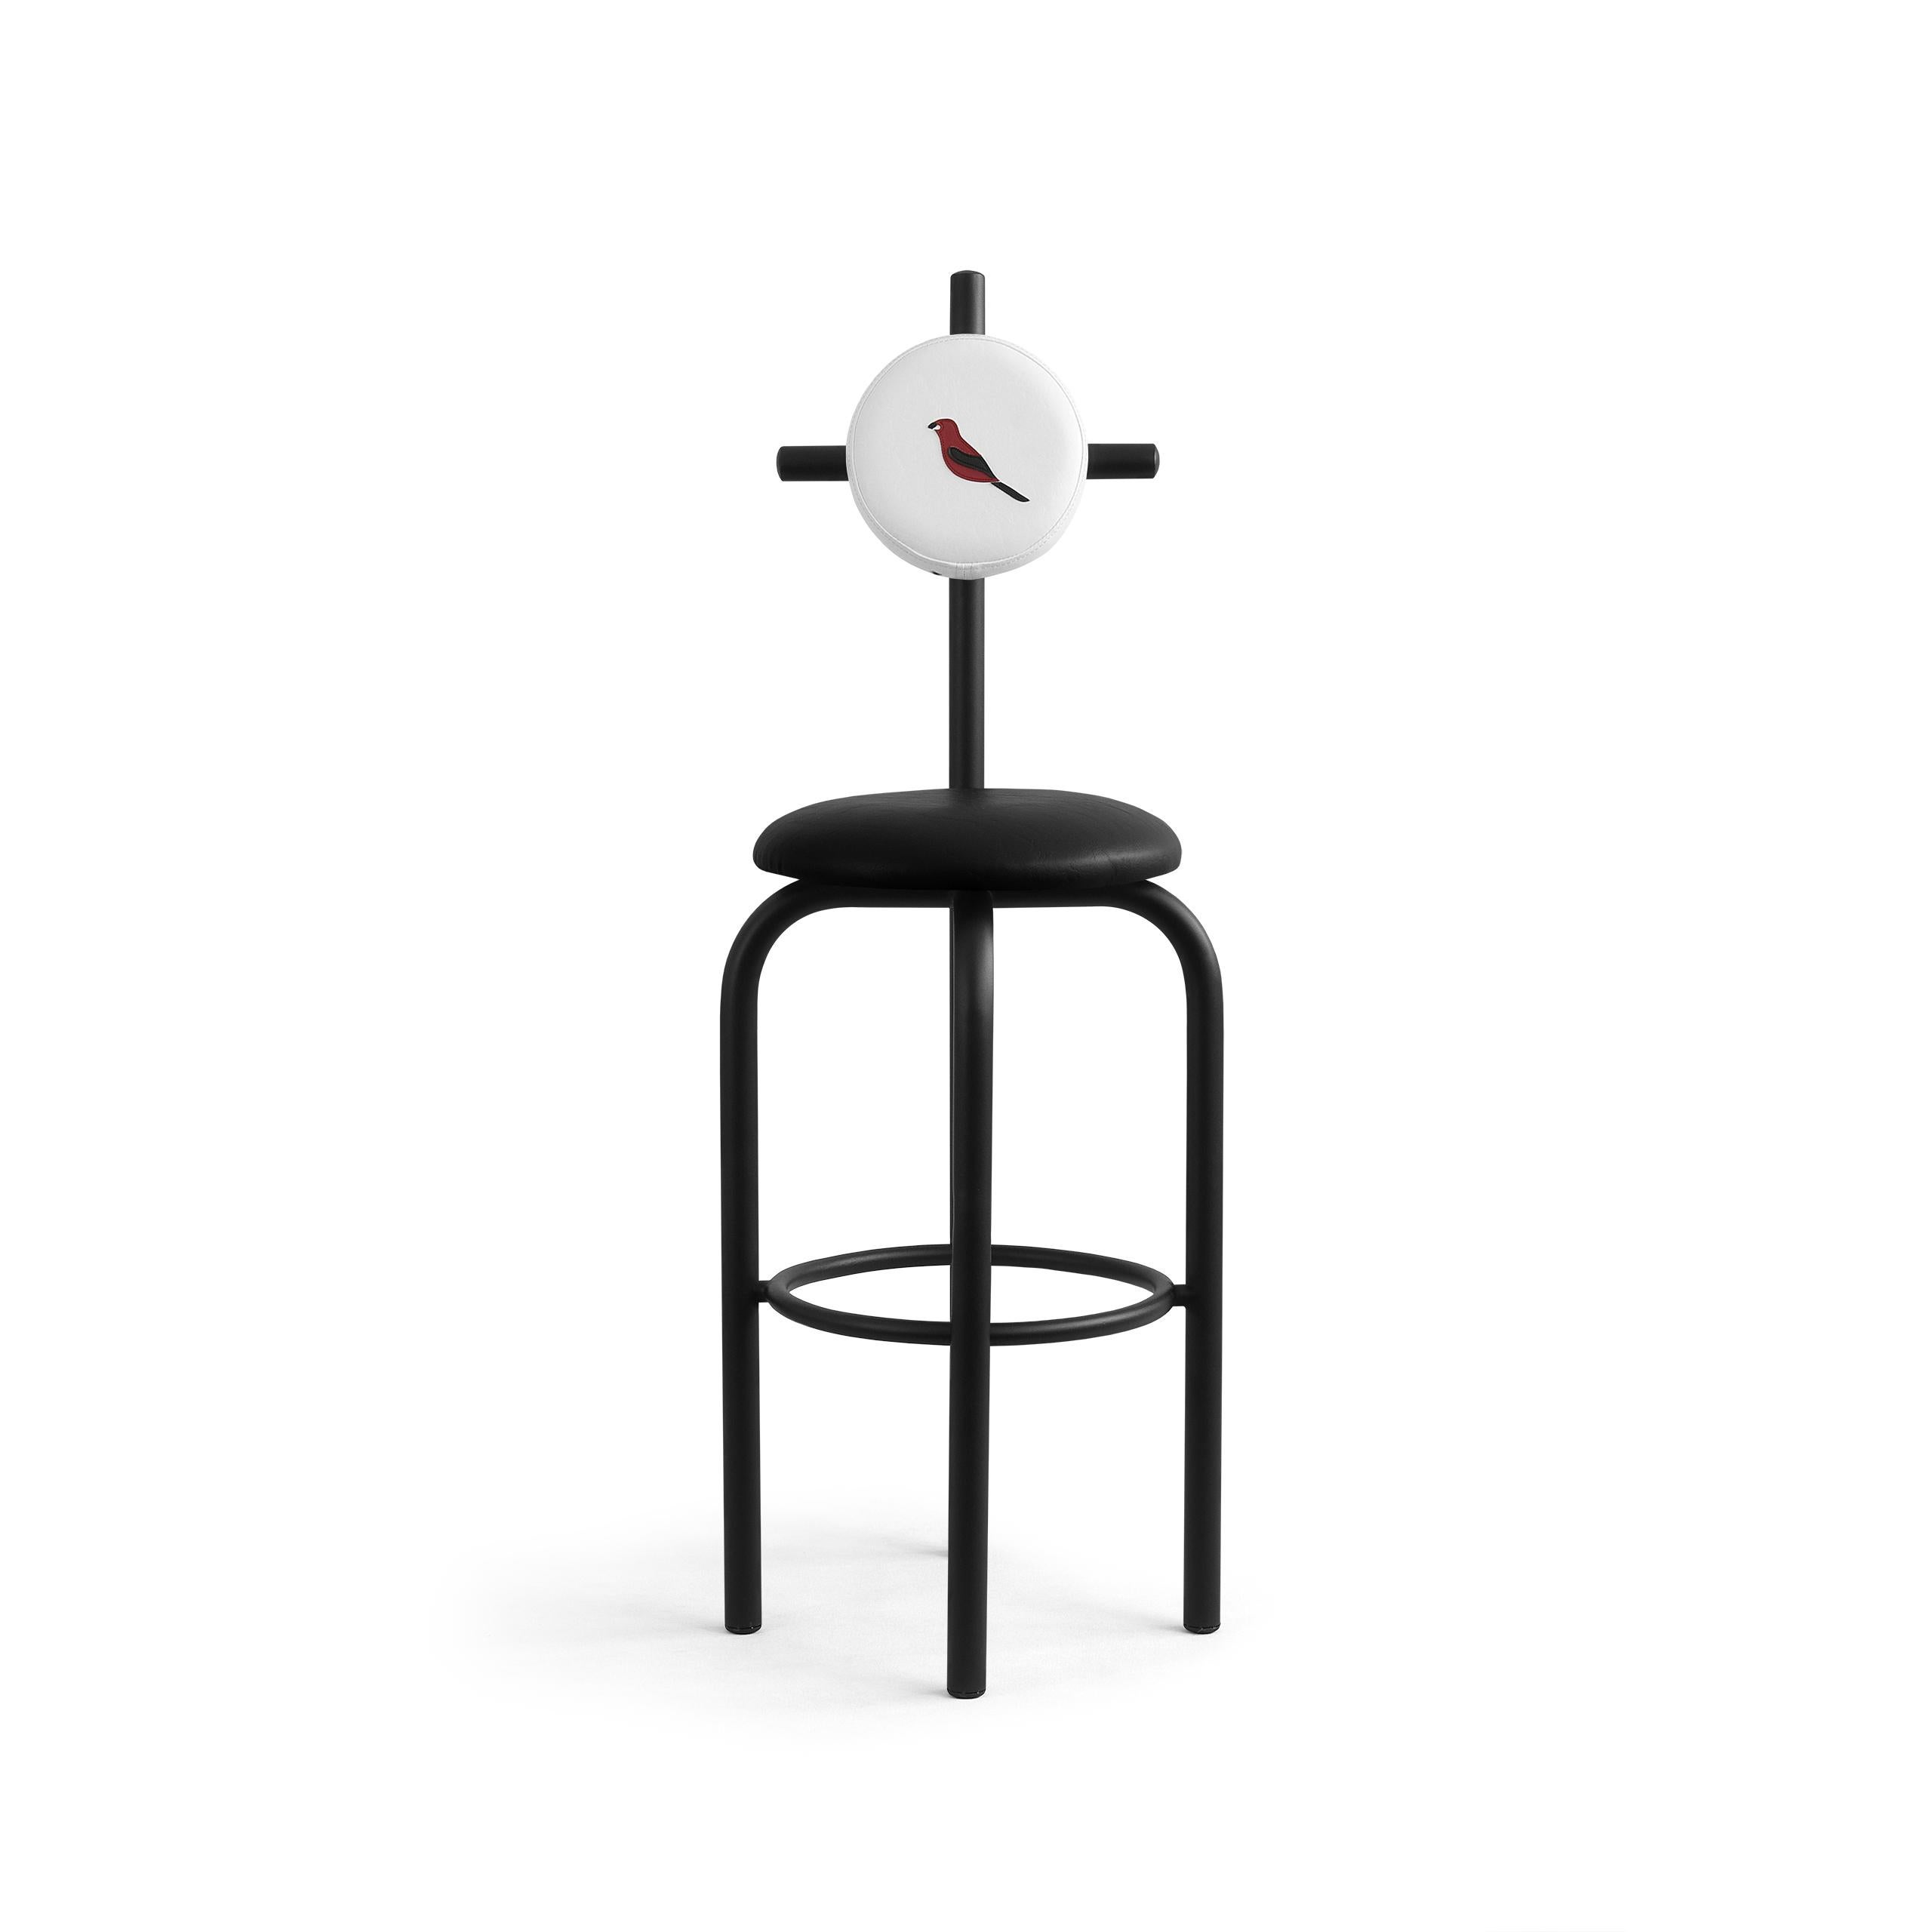 PK19 bar stool is handcrafted in tubular carbon steel and is finished in black micro-textured electrostatic painting.
Seat and backrest are upholstered in nautical anti-mold leatherette over naval plywood.
The seat has no seams and its rounded shape